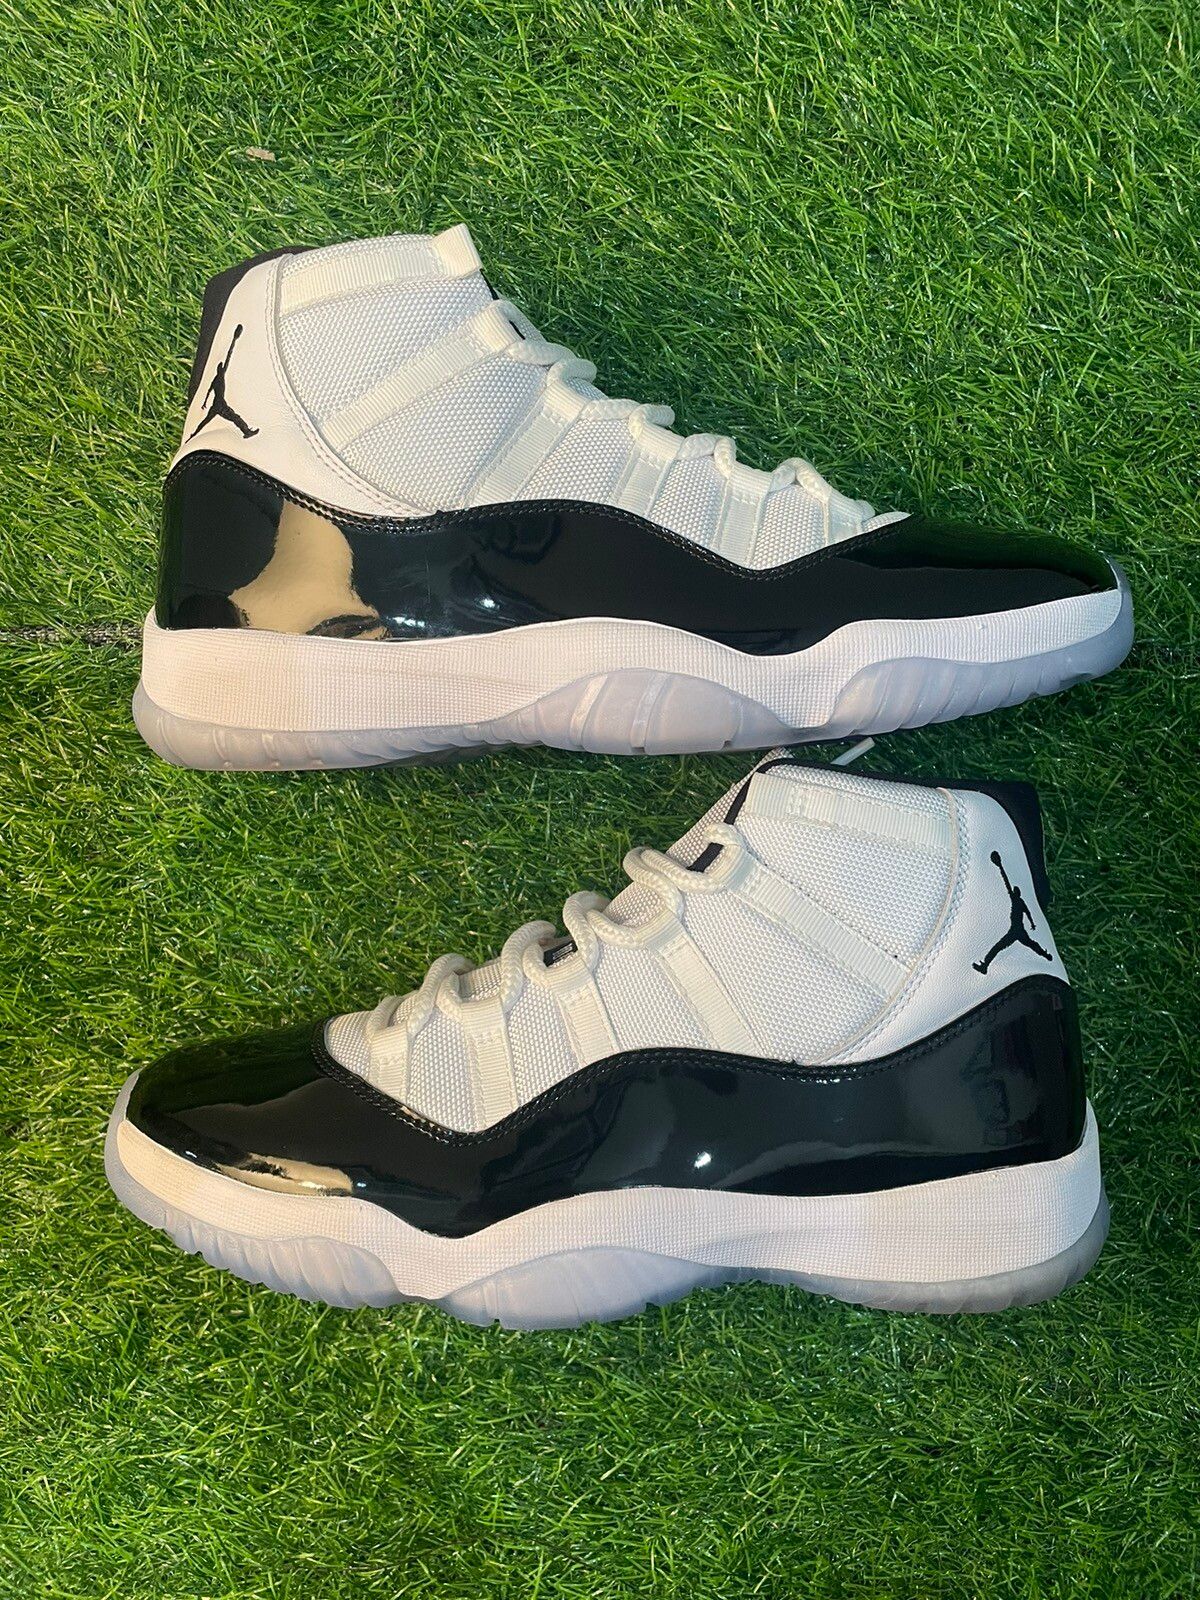 Pre-owned Jordan Brand 11 Concord Shoes In Black/white